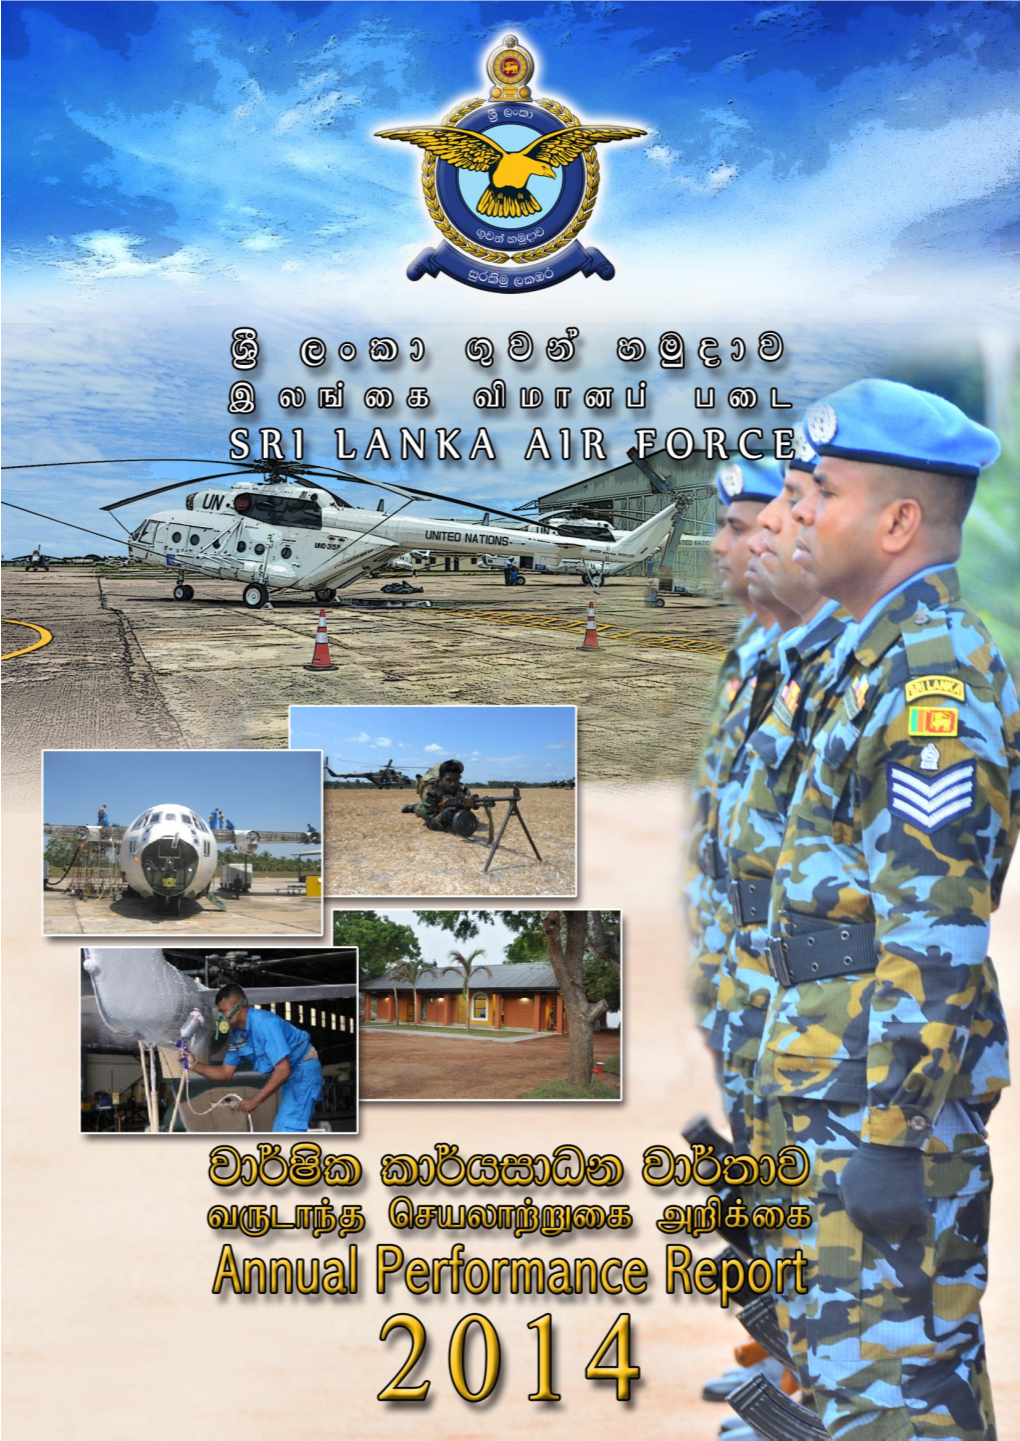 Annual Performance Report of the Sri Lanka Air Force for the Year 2014